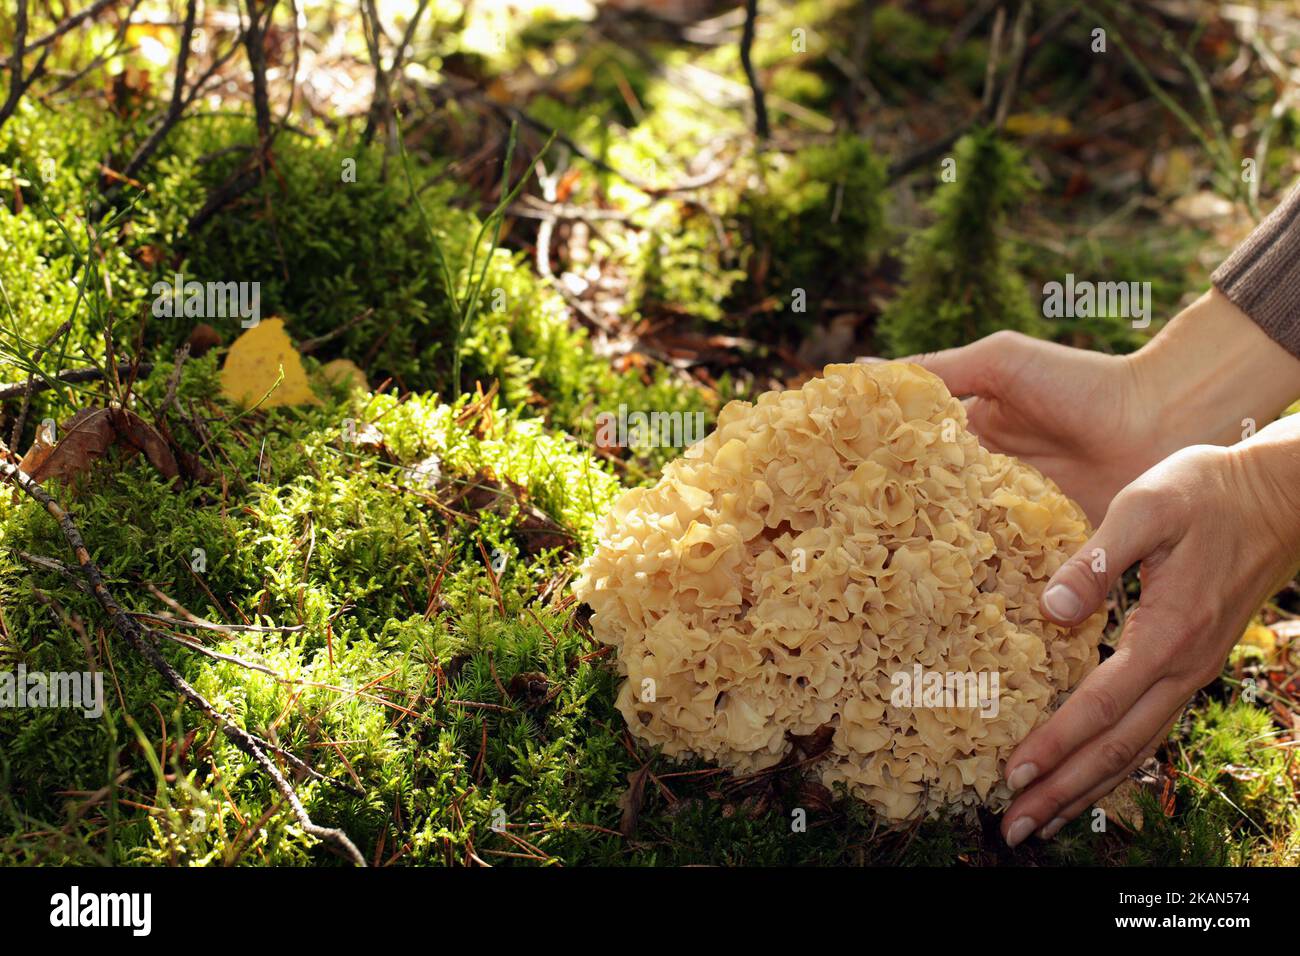 A wild edible fungus Wood Cauliflower (Sparassis crispa) growing in the forest. A woman's hands embrace it. It has a yellowish creamy wavy surface. Stock Photo